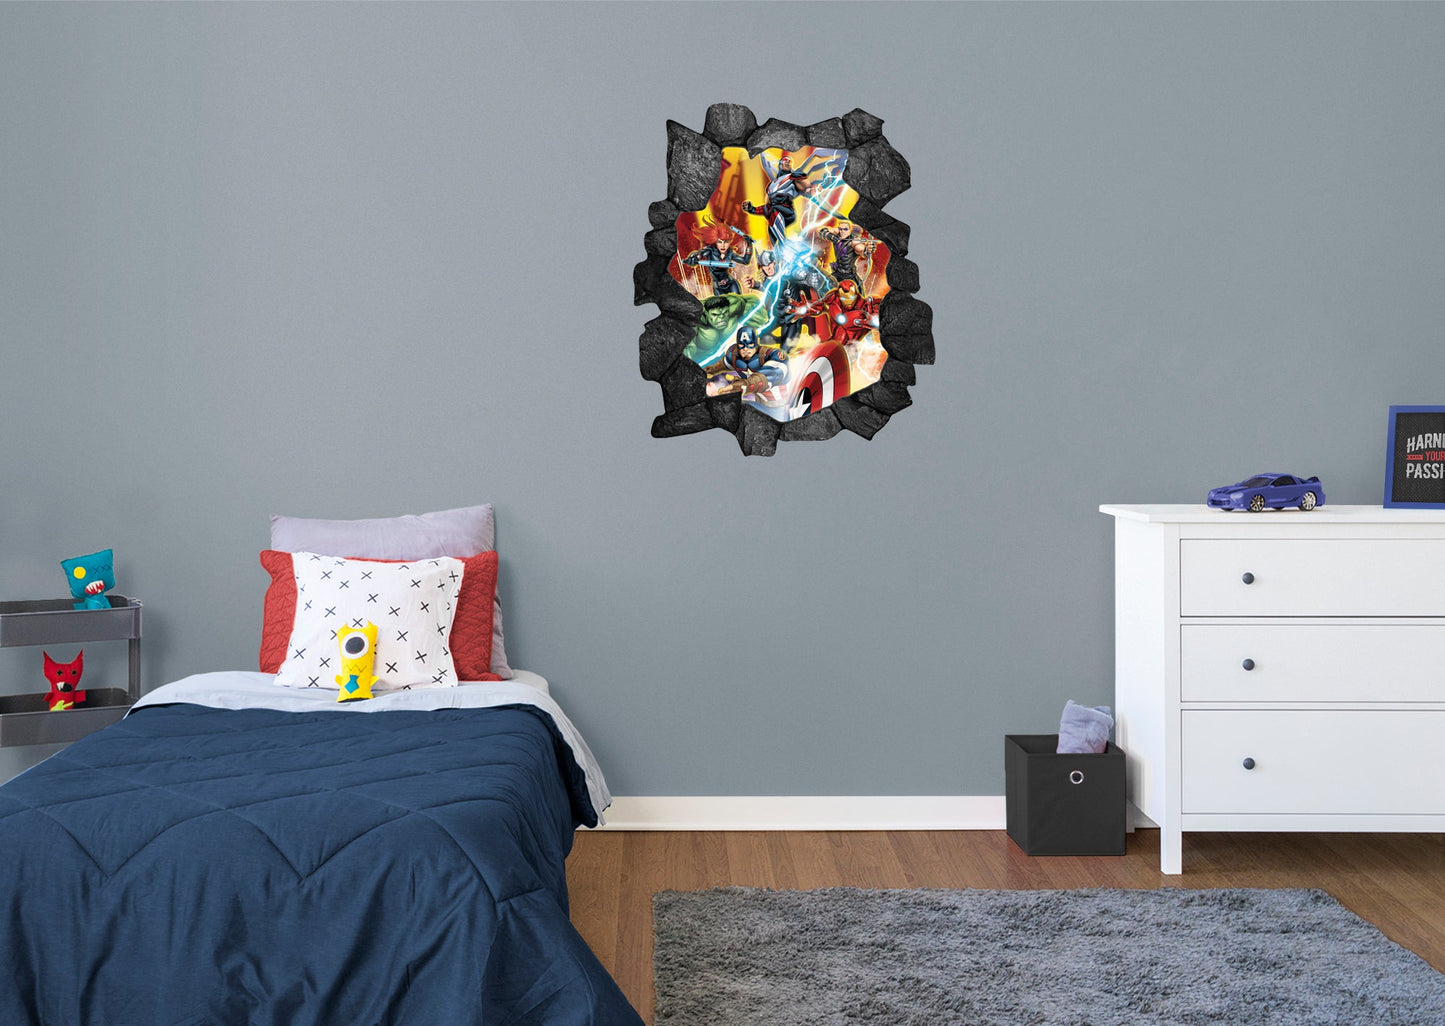 Avengers: Broken Wall 6 Instant Window - Officially Licensed Marvel Removable Adhesive Decal